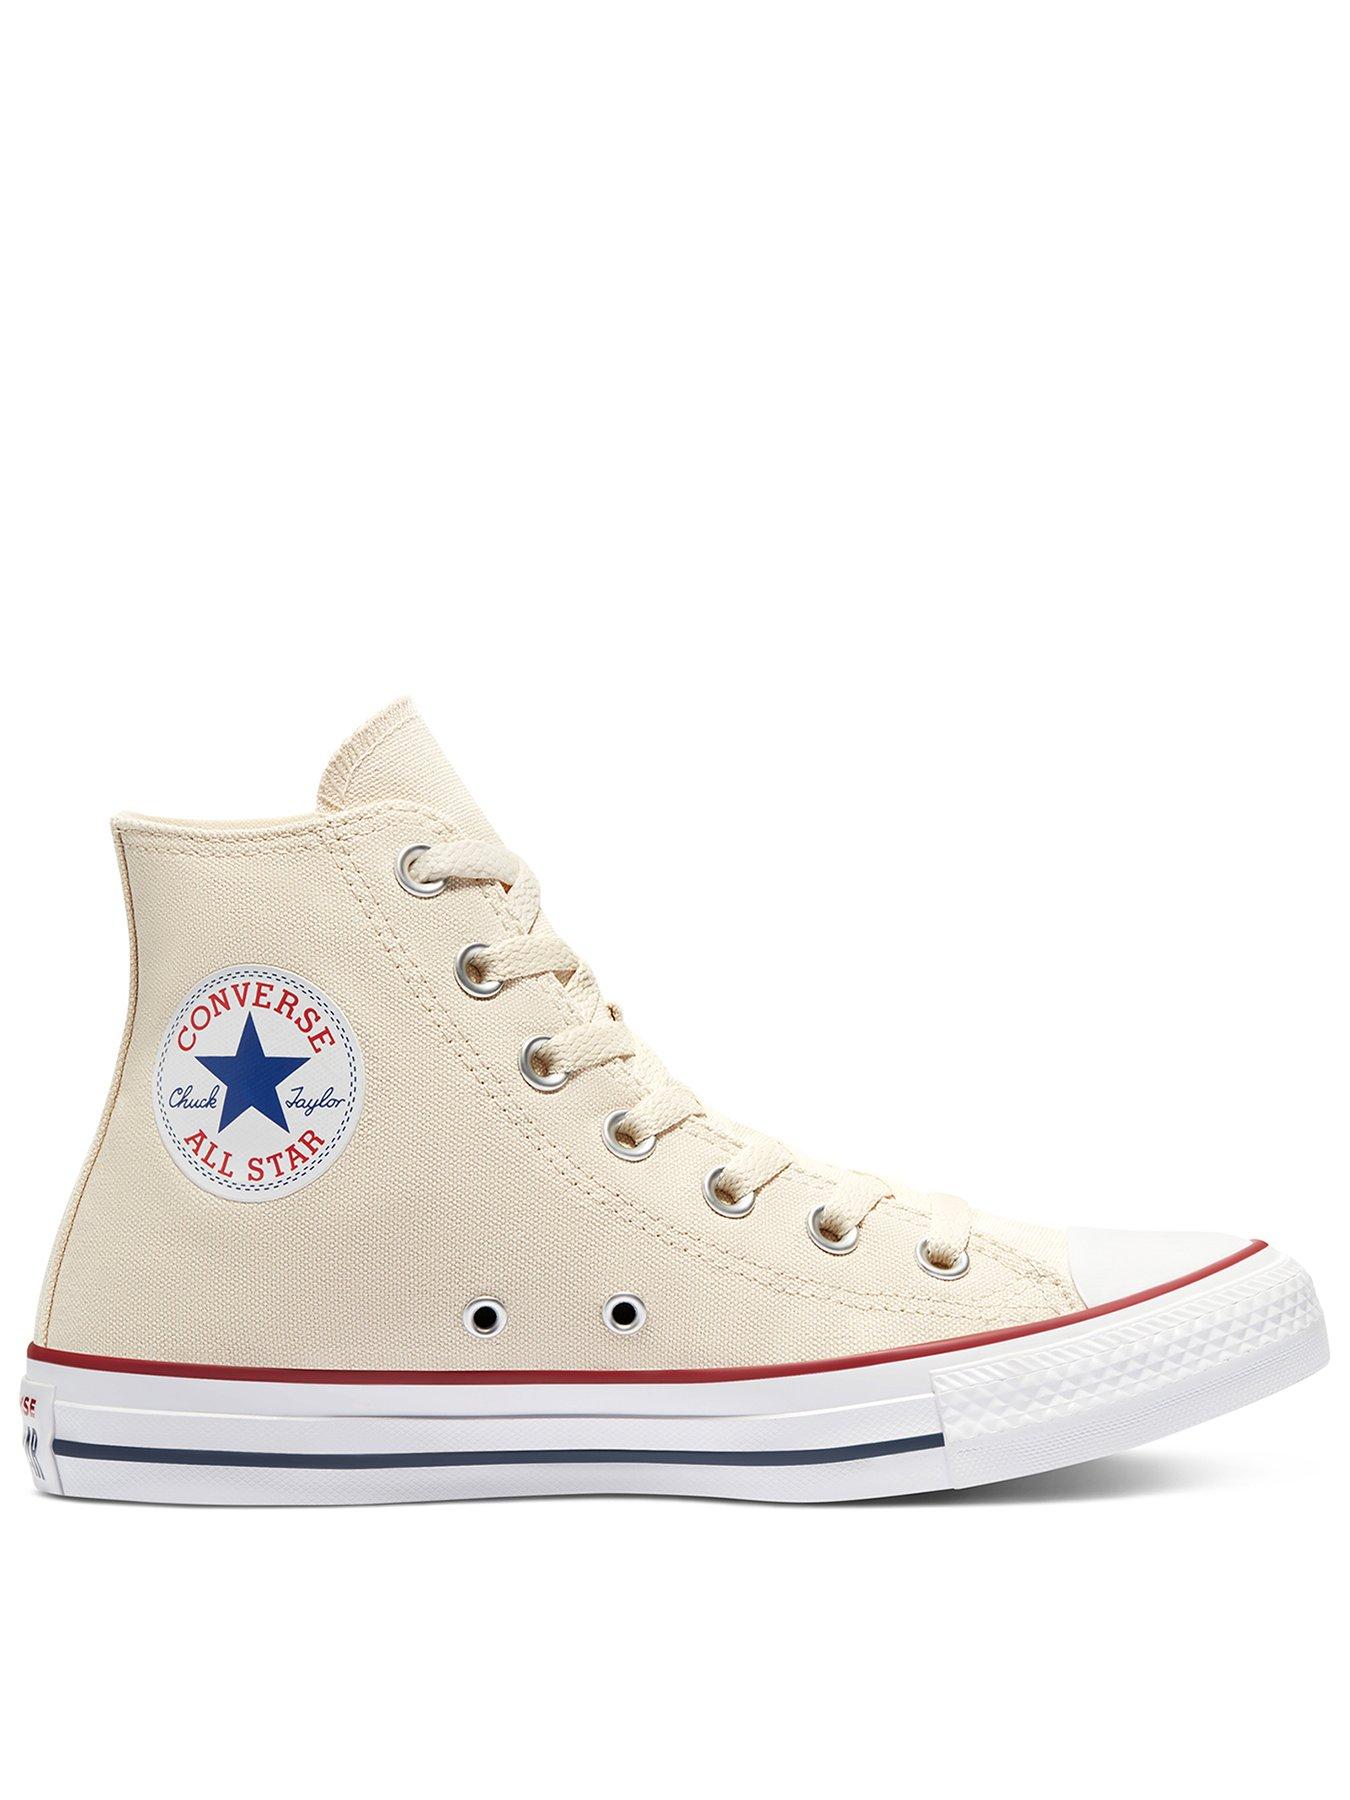 Converse Unisex Hi Top Trainers - Off White, Off White, Size 6, Women